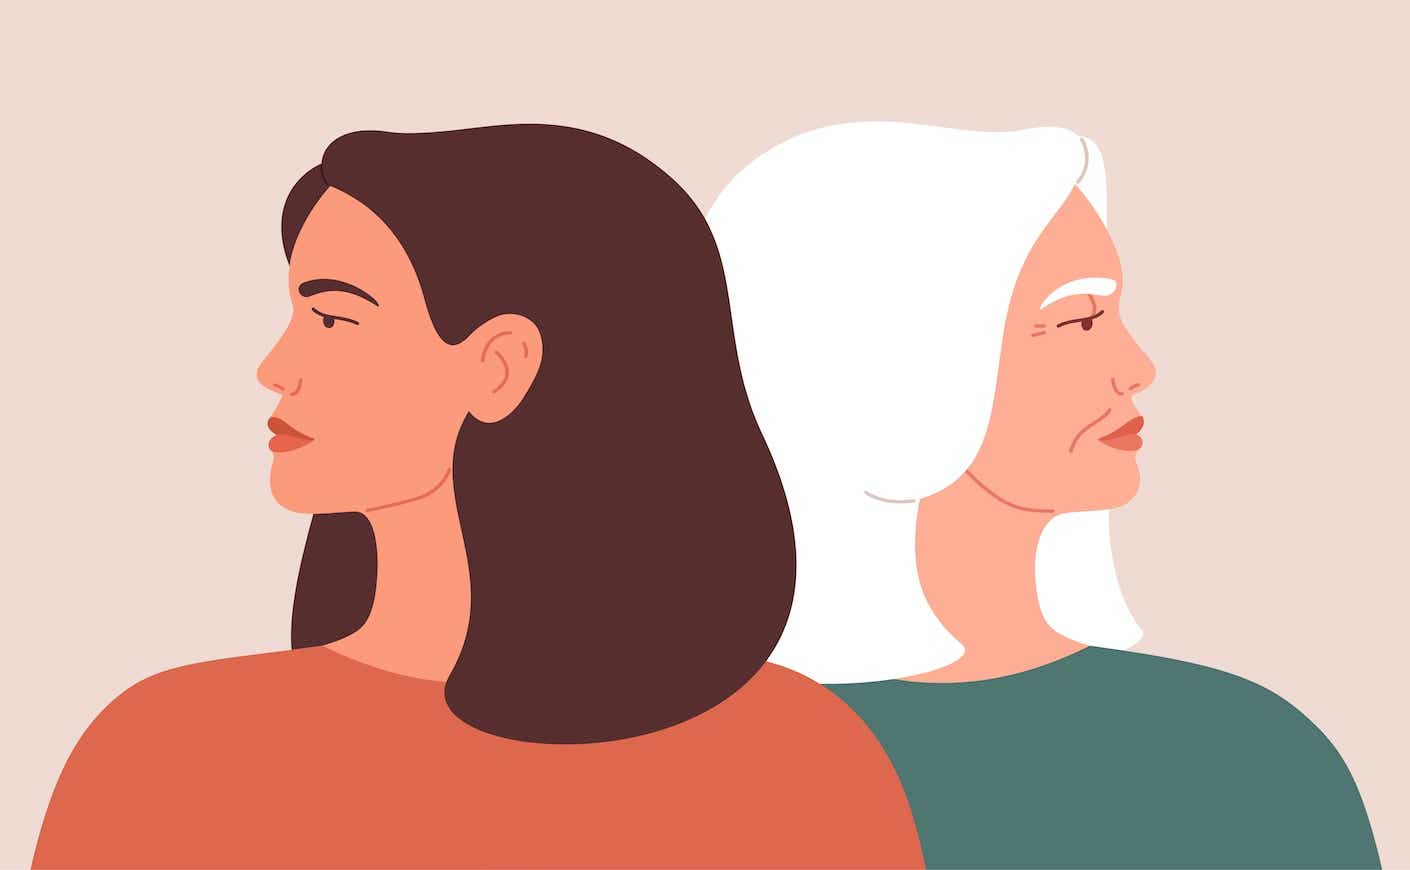 illustration of a young woman and an older woman looking away from each other with sadness